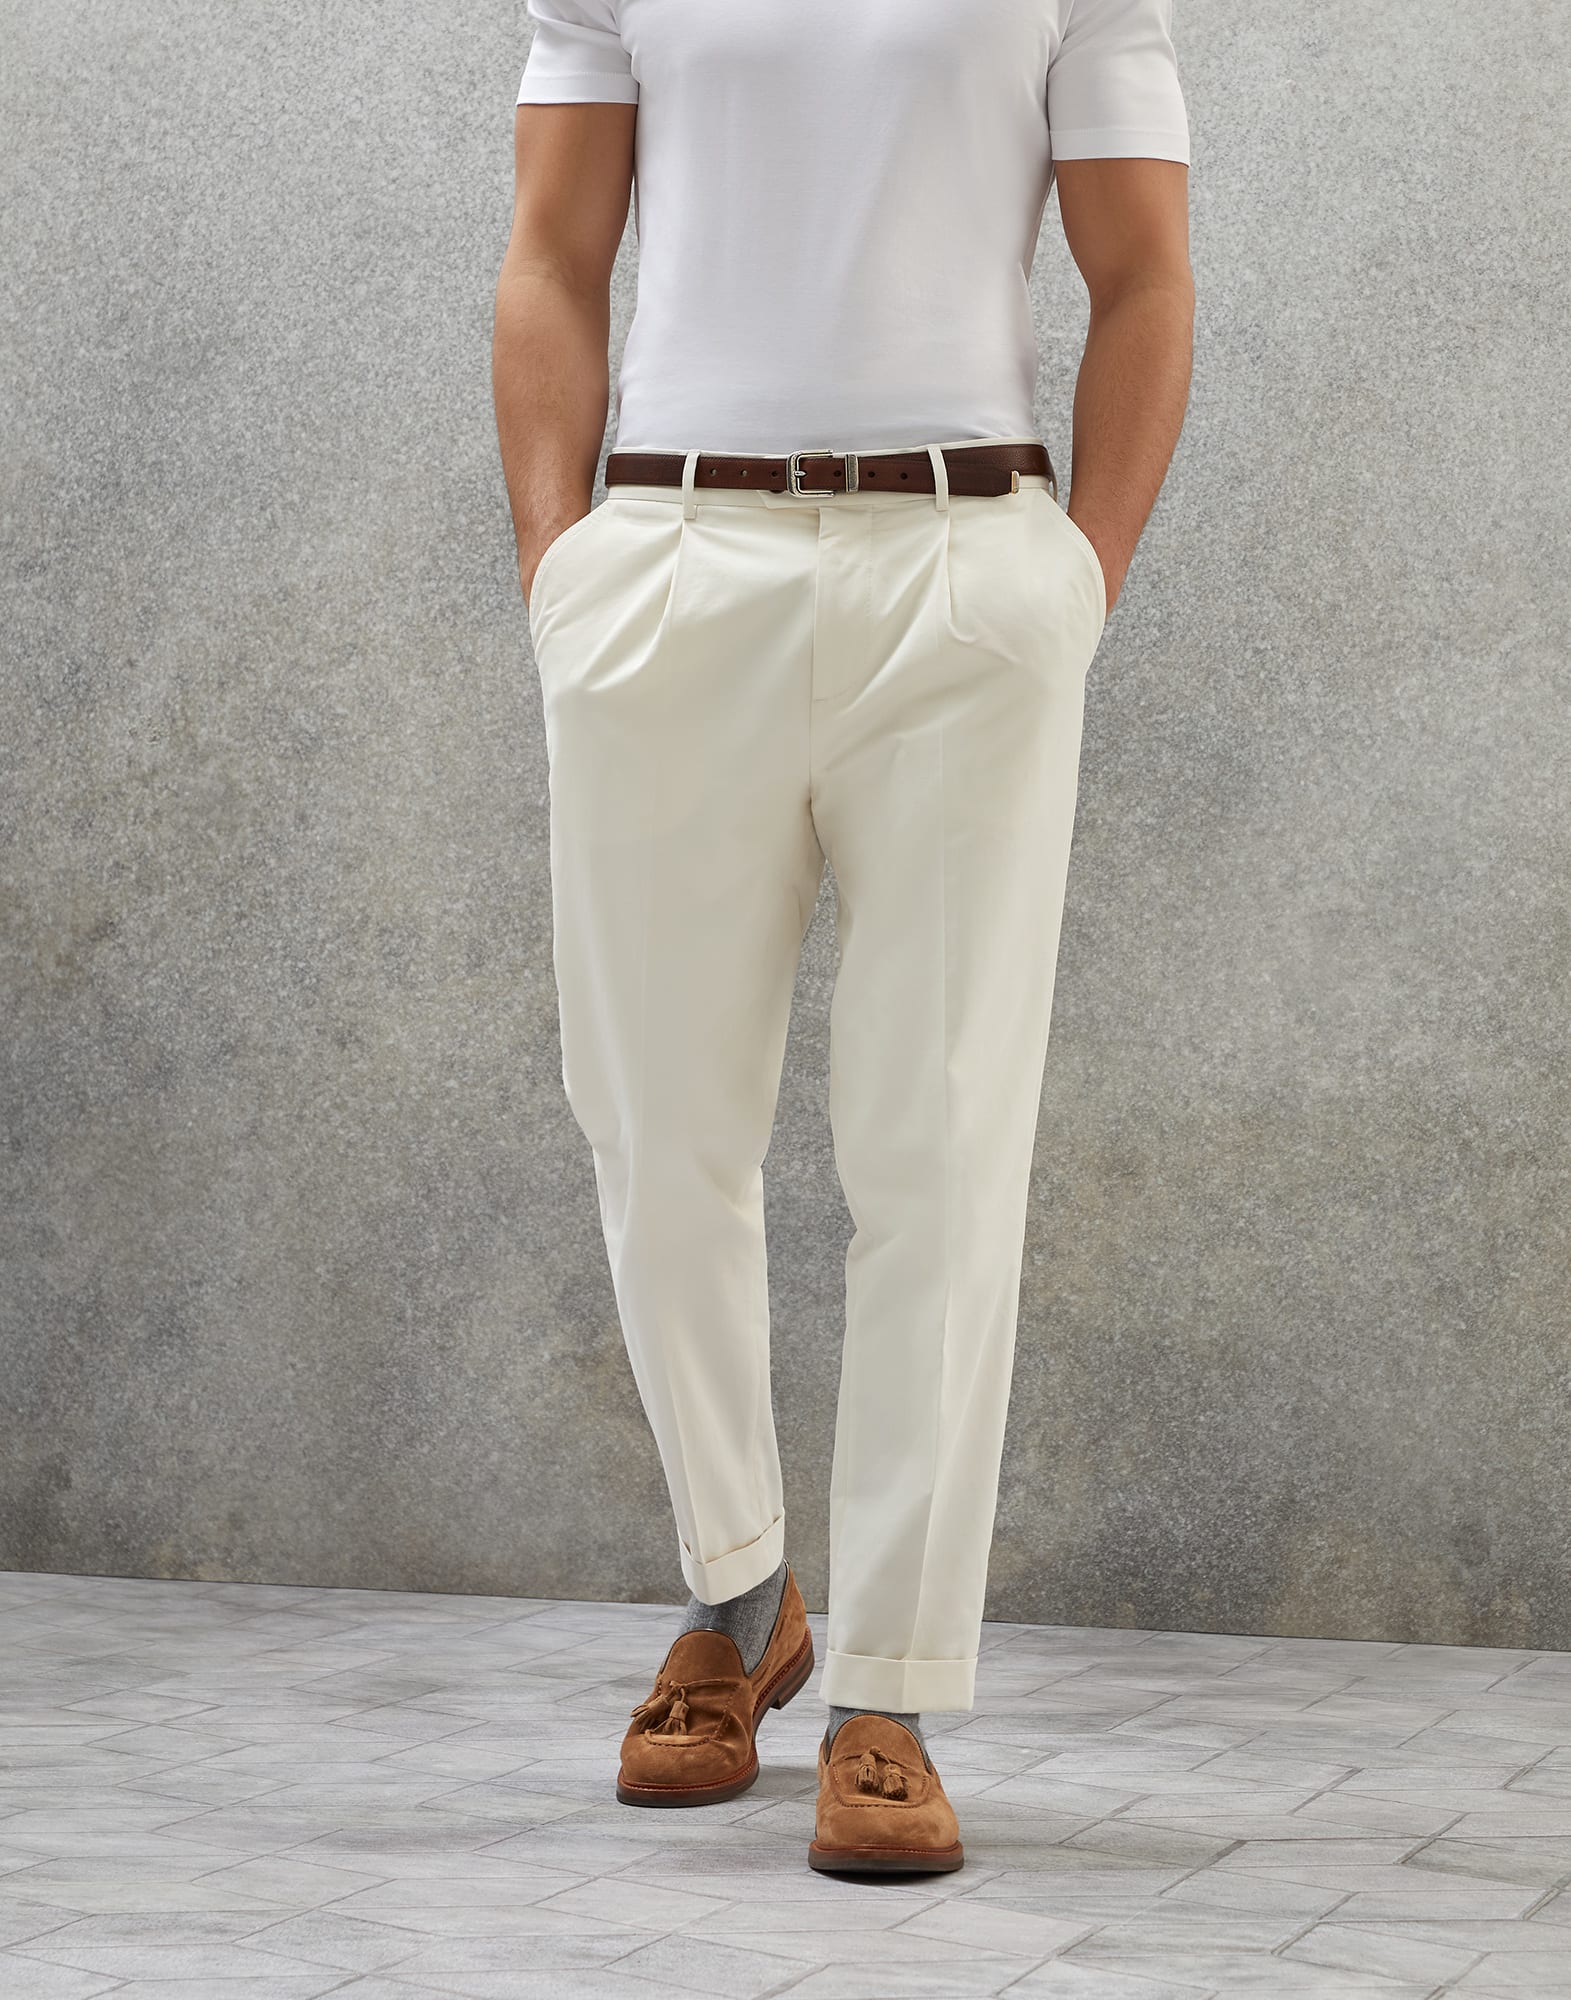 Leisure fit trousers